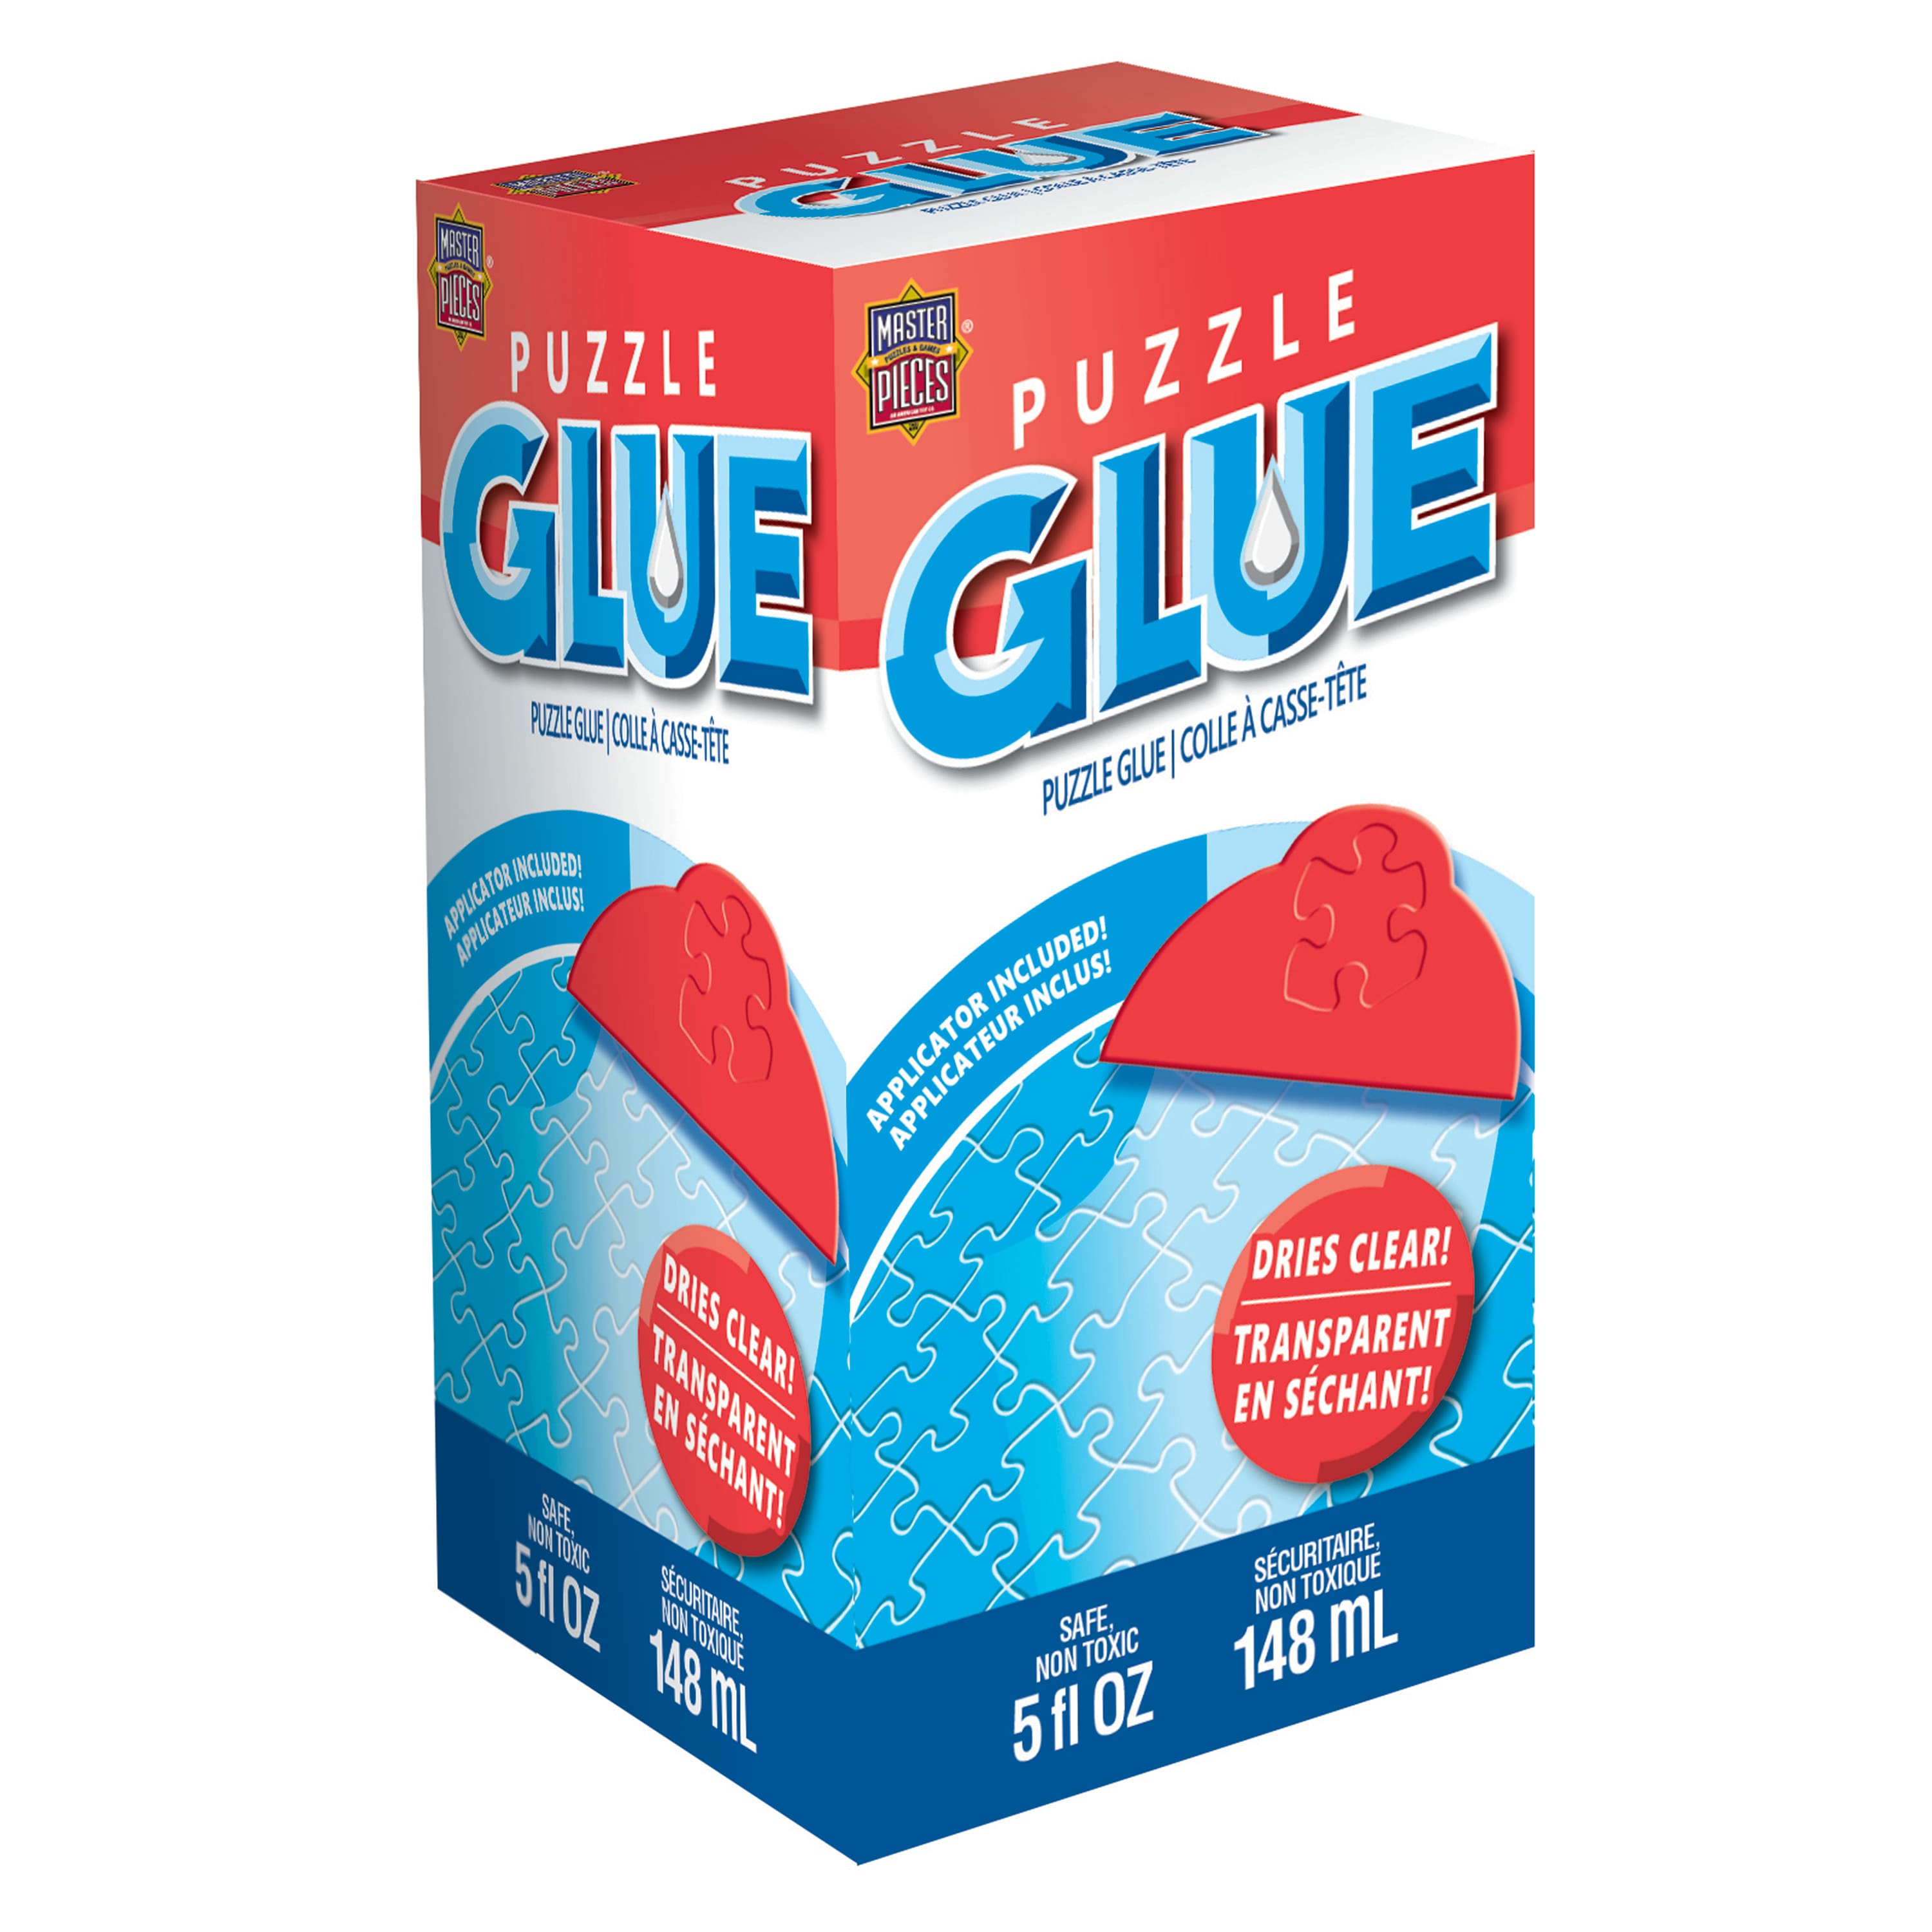 Jigsaw Puzzle Glue Quick Dry for Paper and Wood with Glue